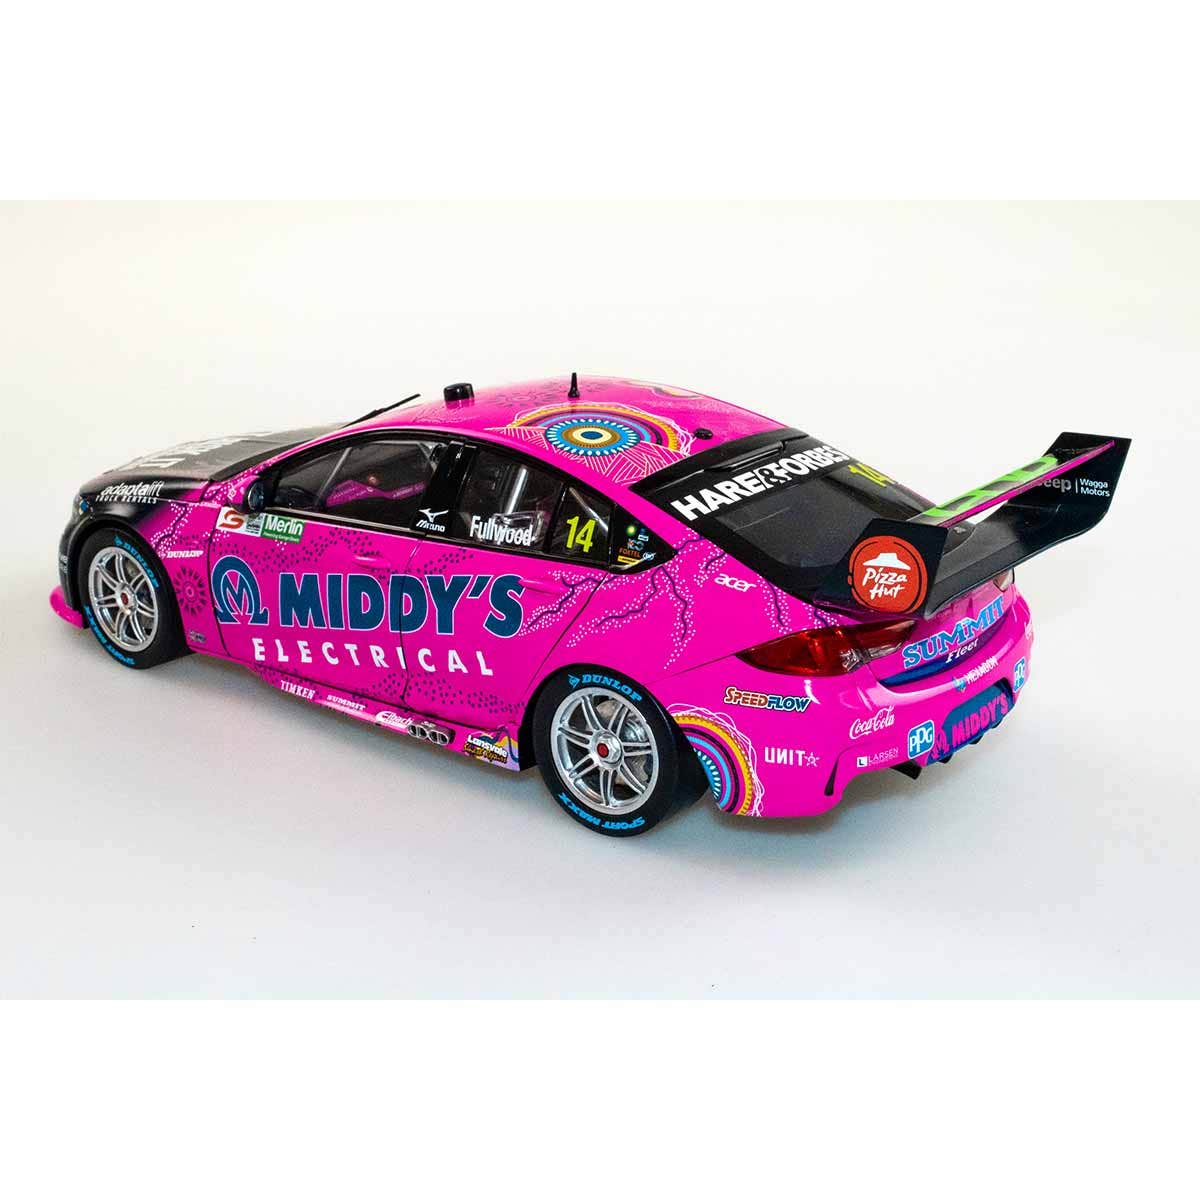 HOLDEN ZB COMMODORE - BJR - FULLWOOD #14 Middy's Electrical - Merlin Darwin Triple Crown - Race 18 - 1:18 Scale Diecast Model Car